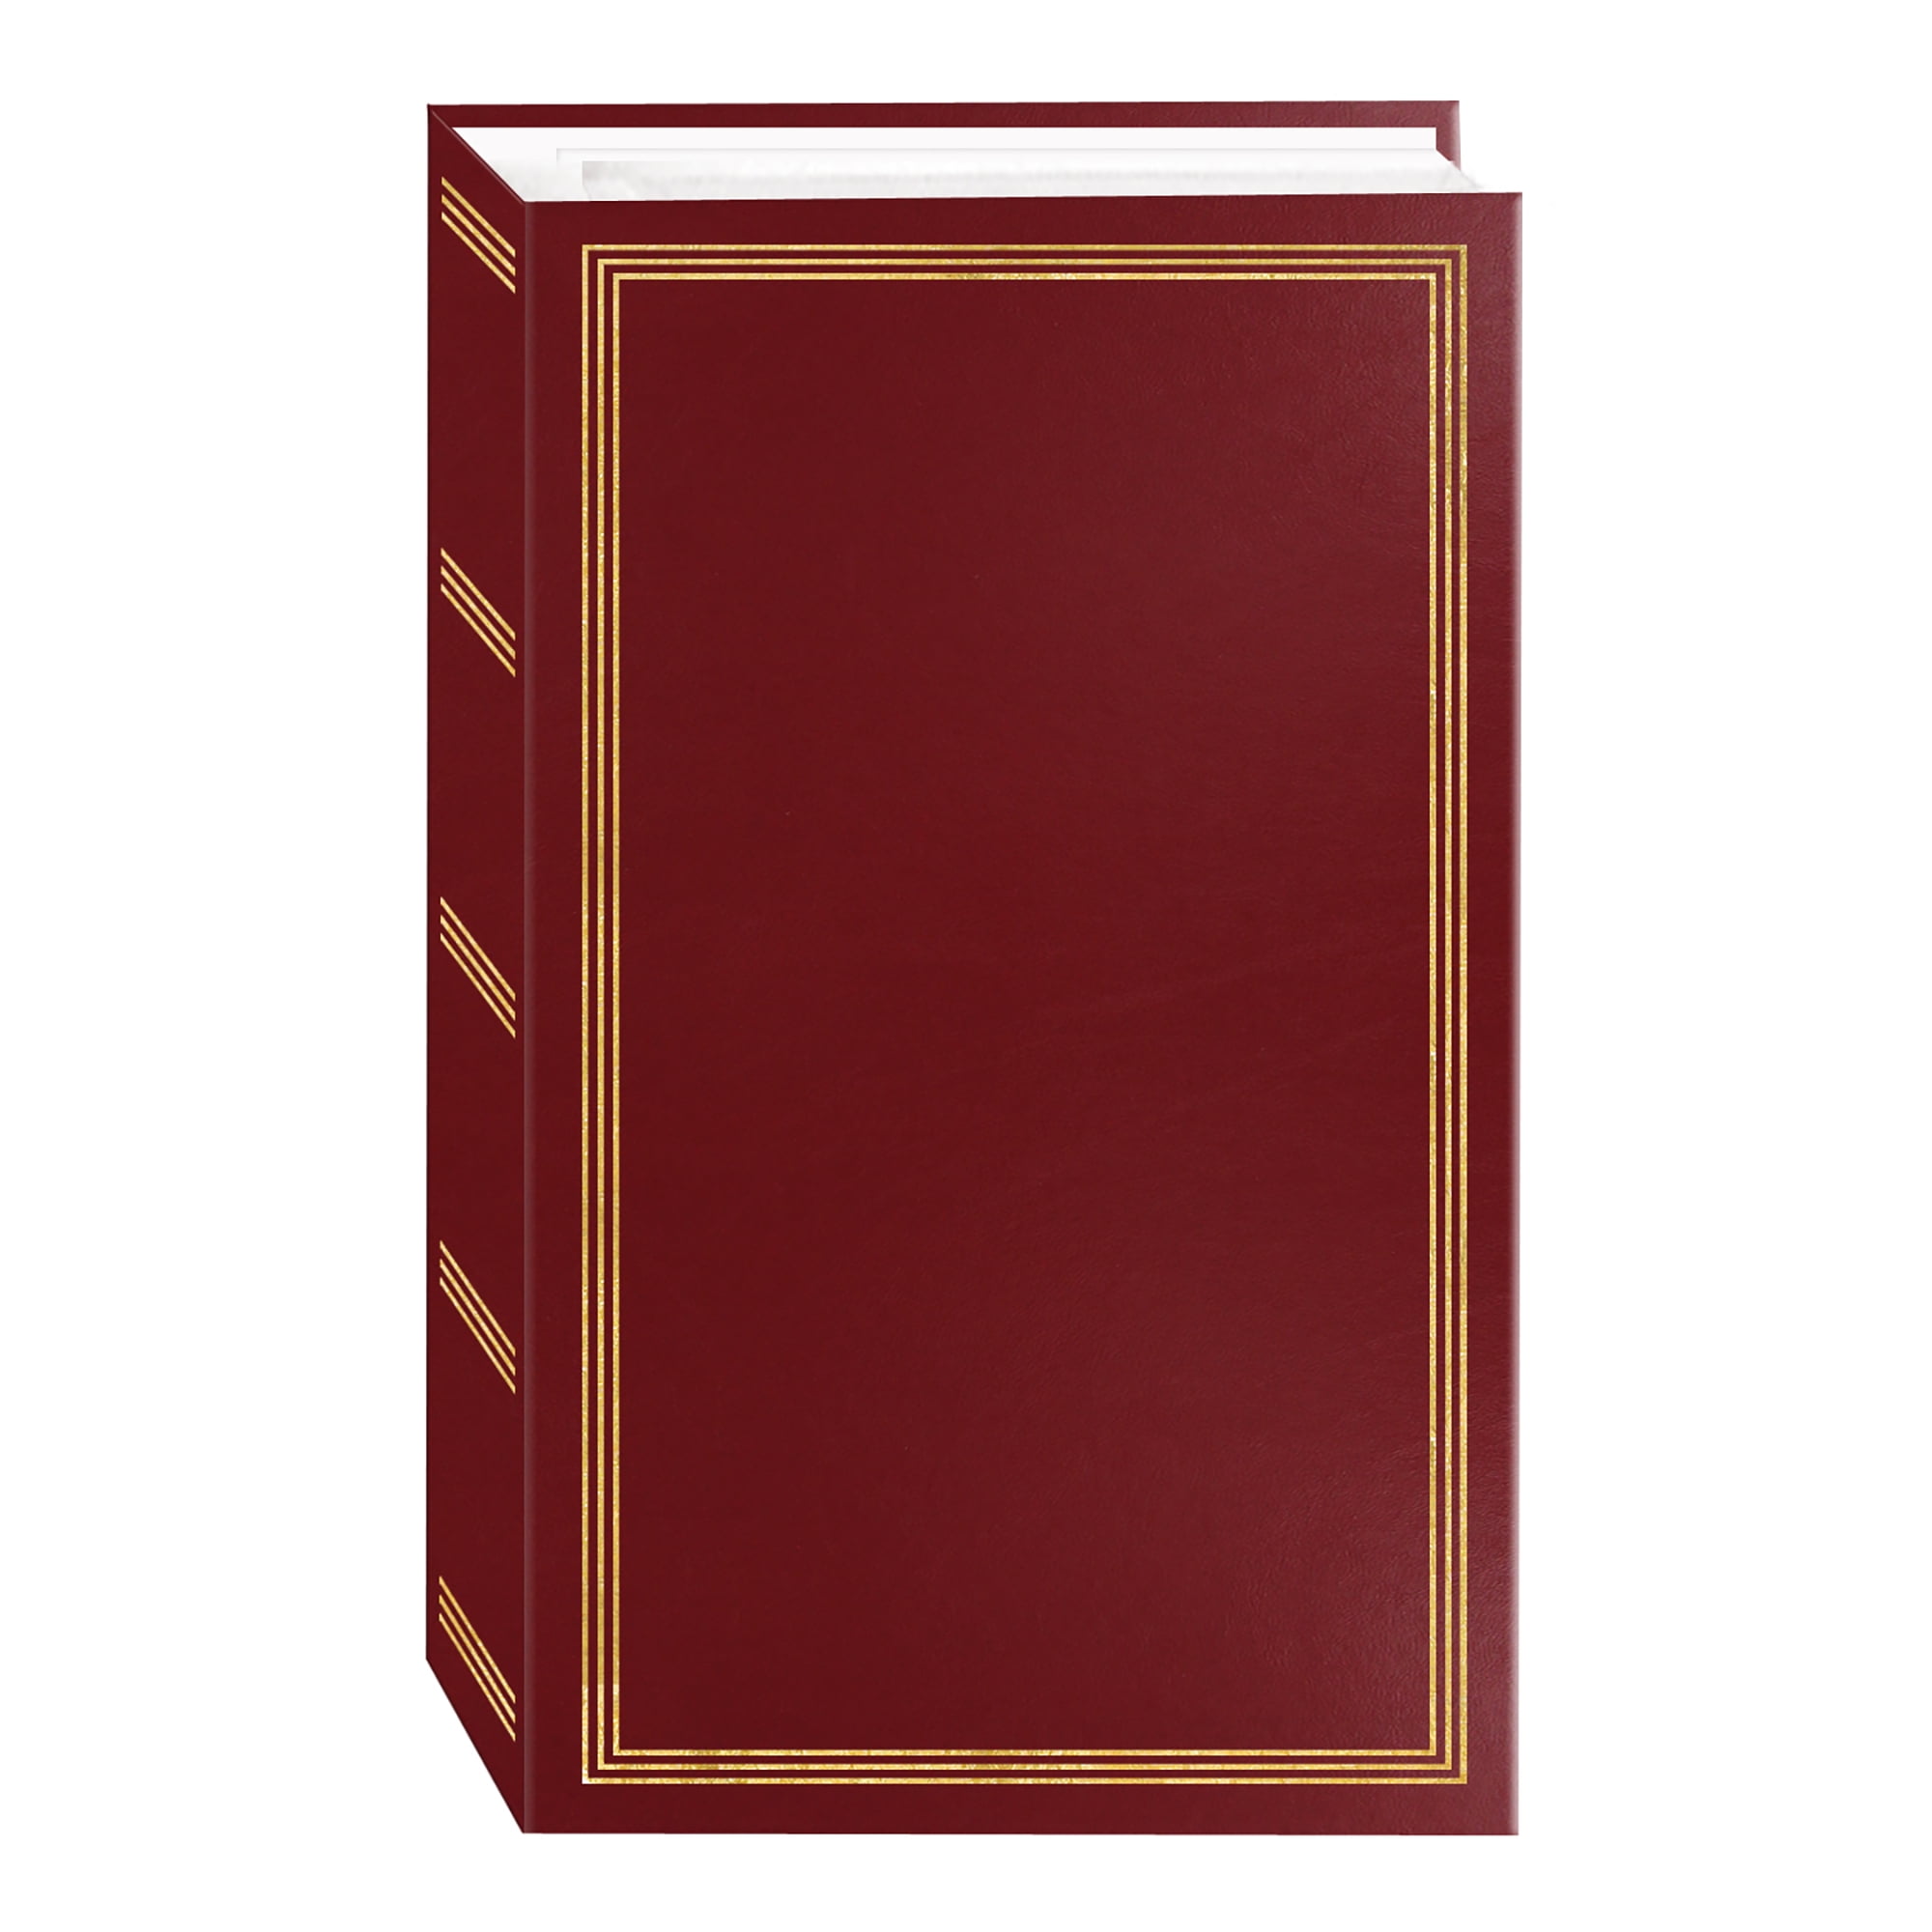 300 Pockets Traditional Slip-in Photo Album Red 6 x 4" 